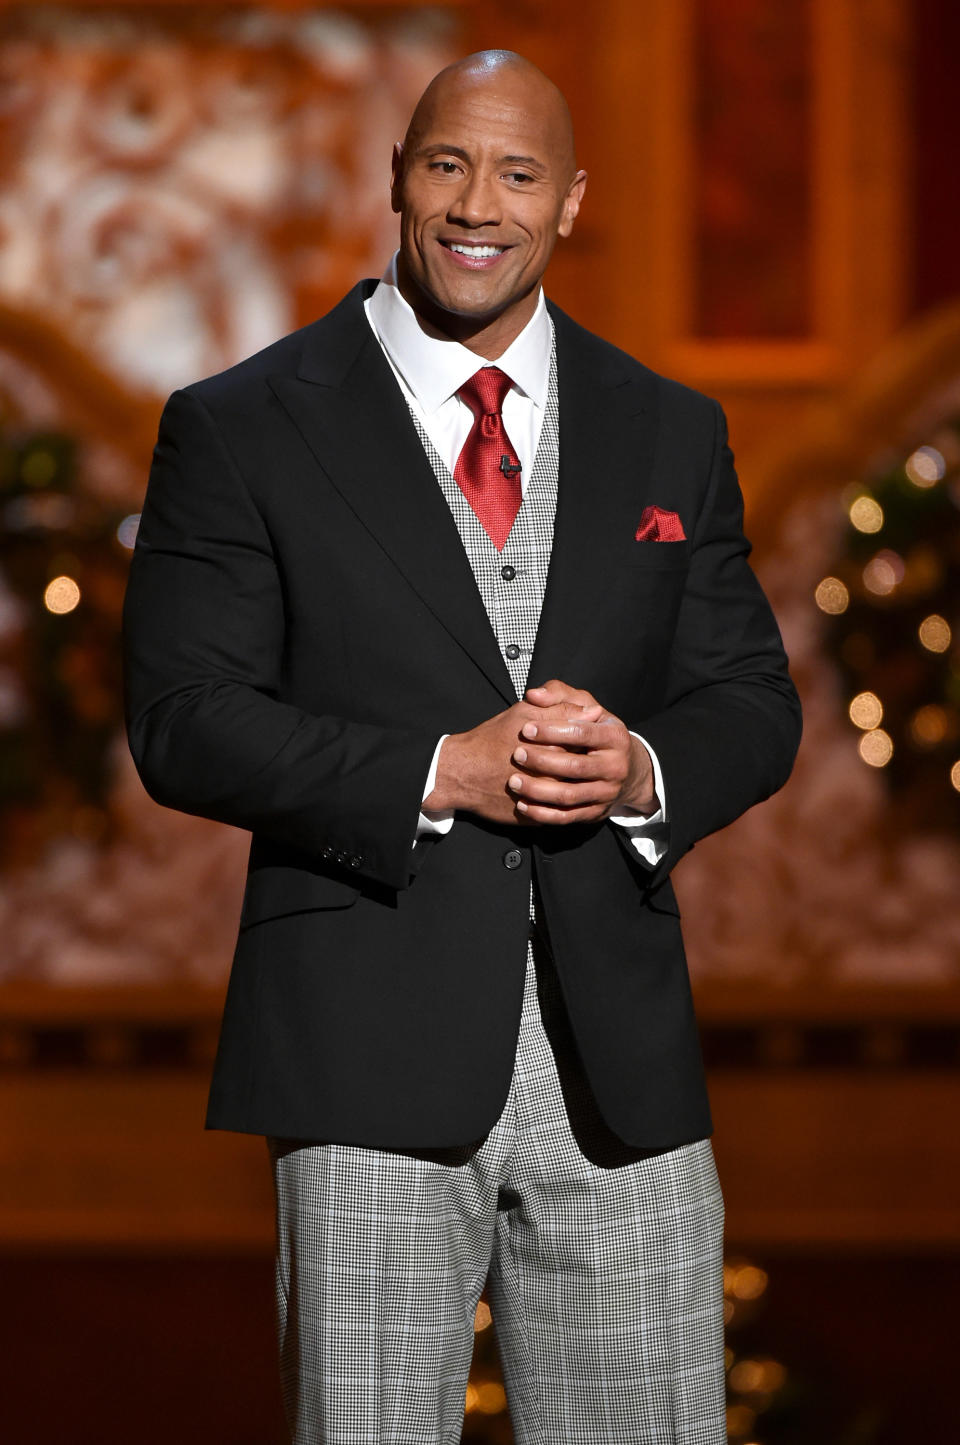 Dwayne "The Rock" Johnson is wearing a checkered three-piece suit with a red tie and pocket square, smiling at the camera while standing in front of a festive background